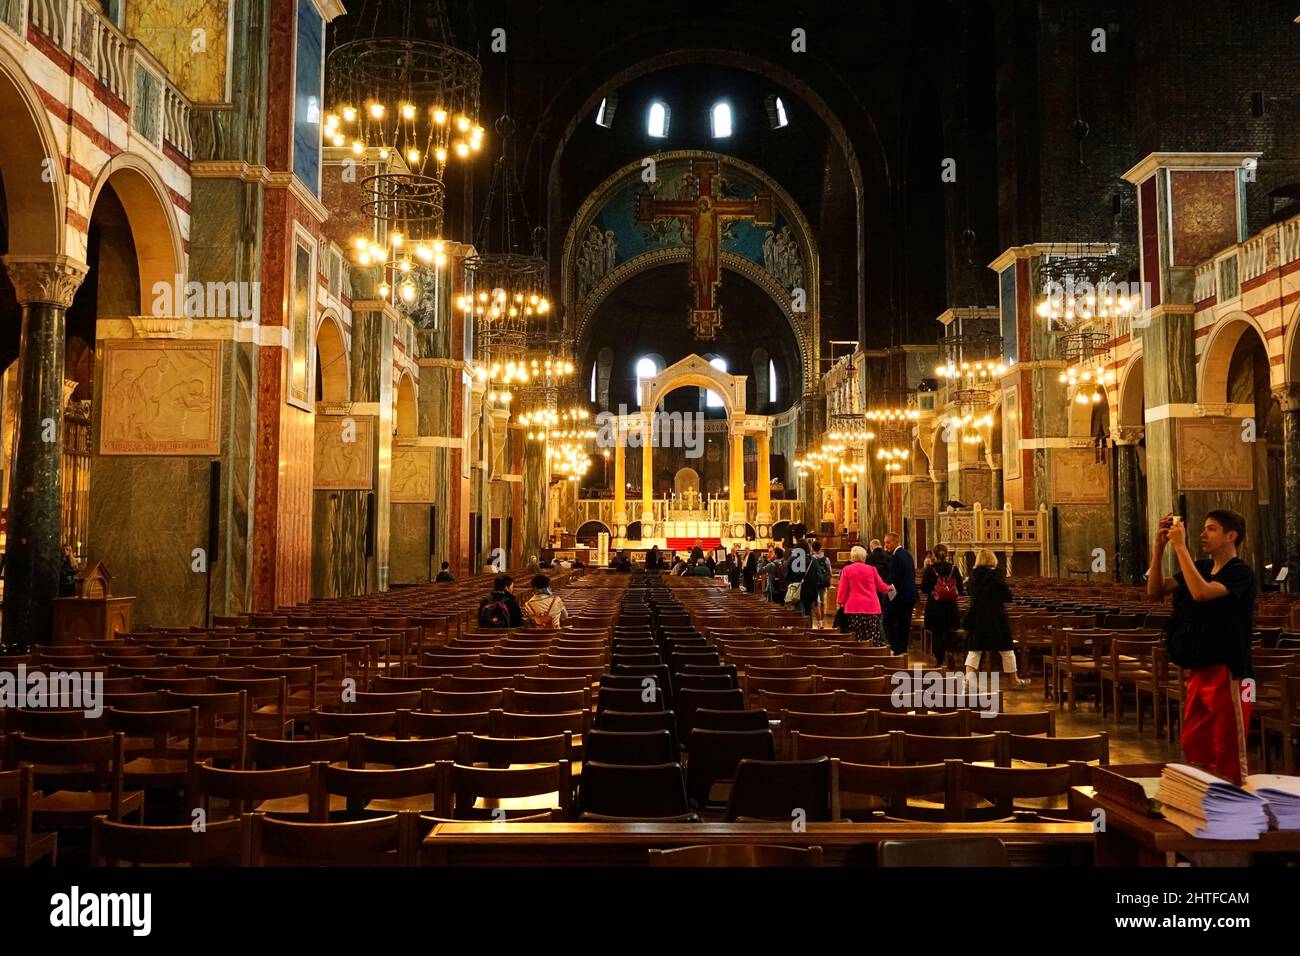 Interior of the Westminster Cathedral in London, England Stock Photo